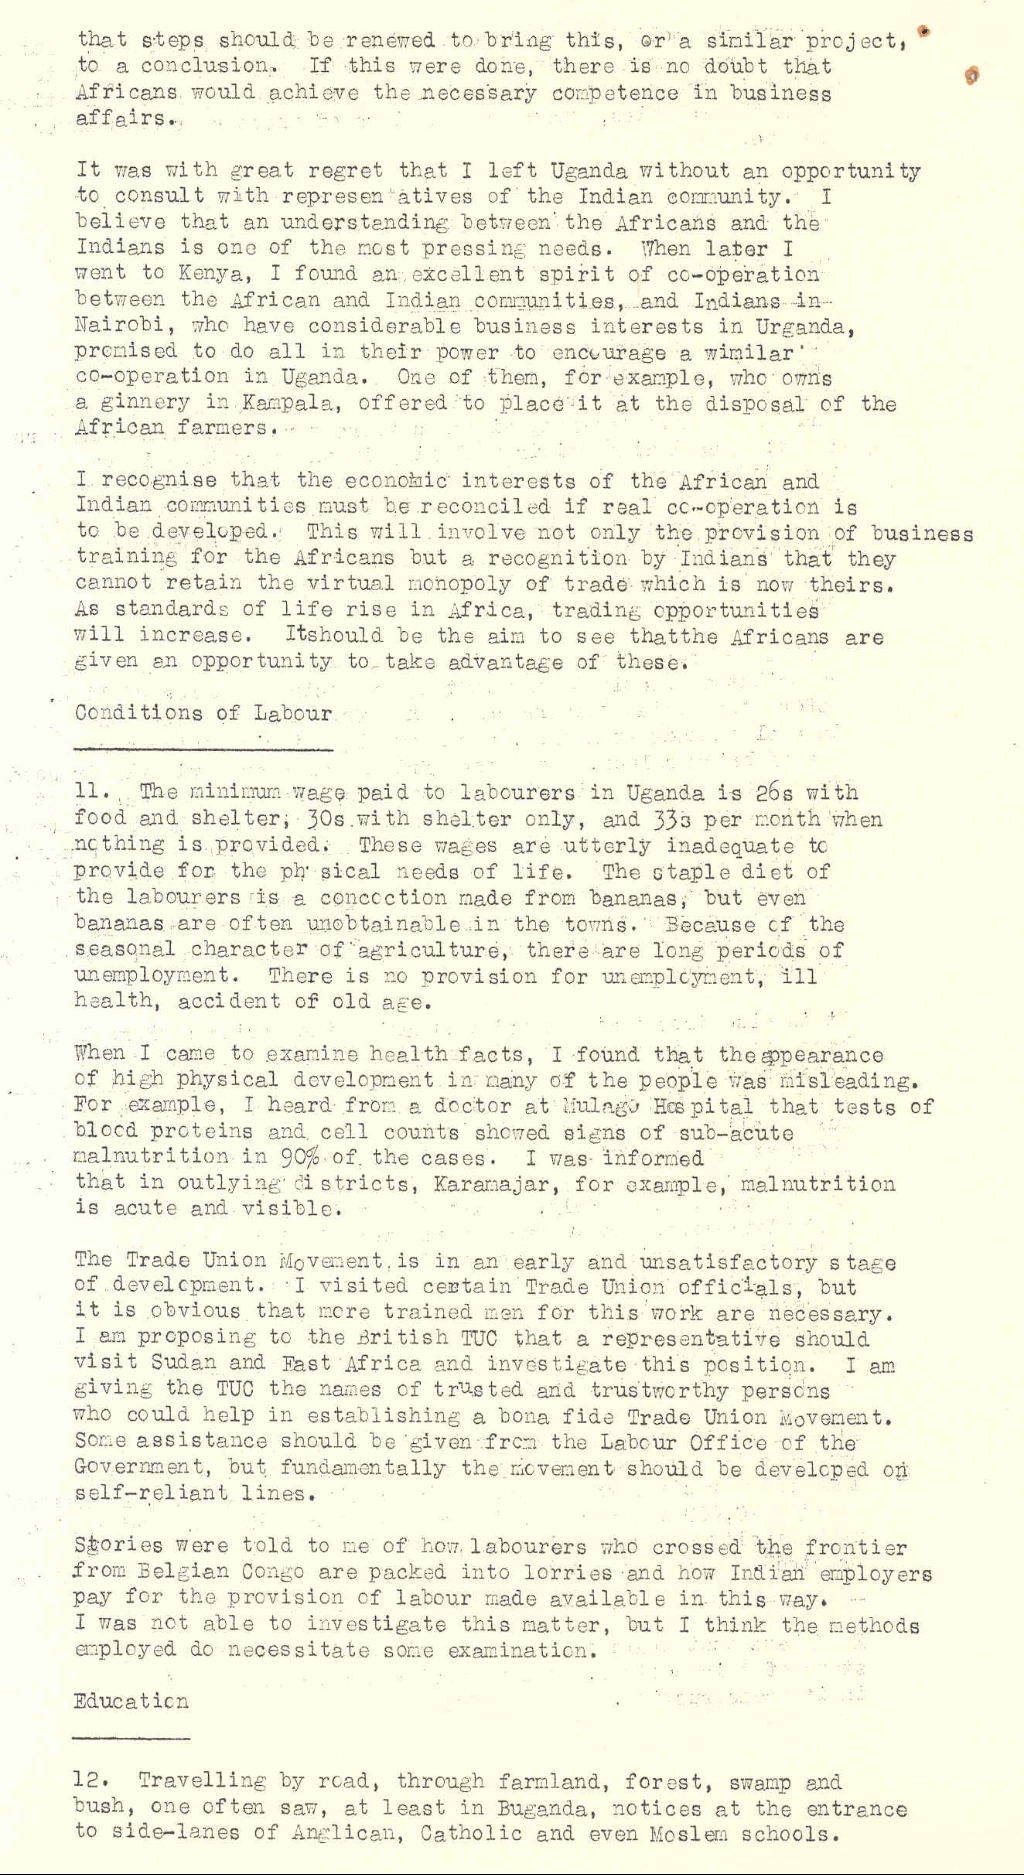 Report on a visit to Uganda by the Labour Party MP Fenner Brockway, 1950